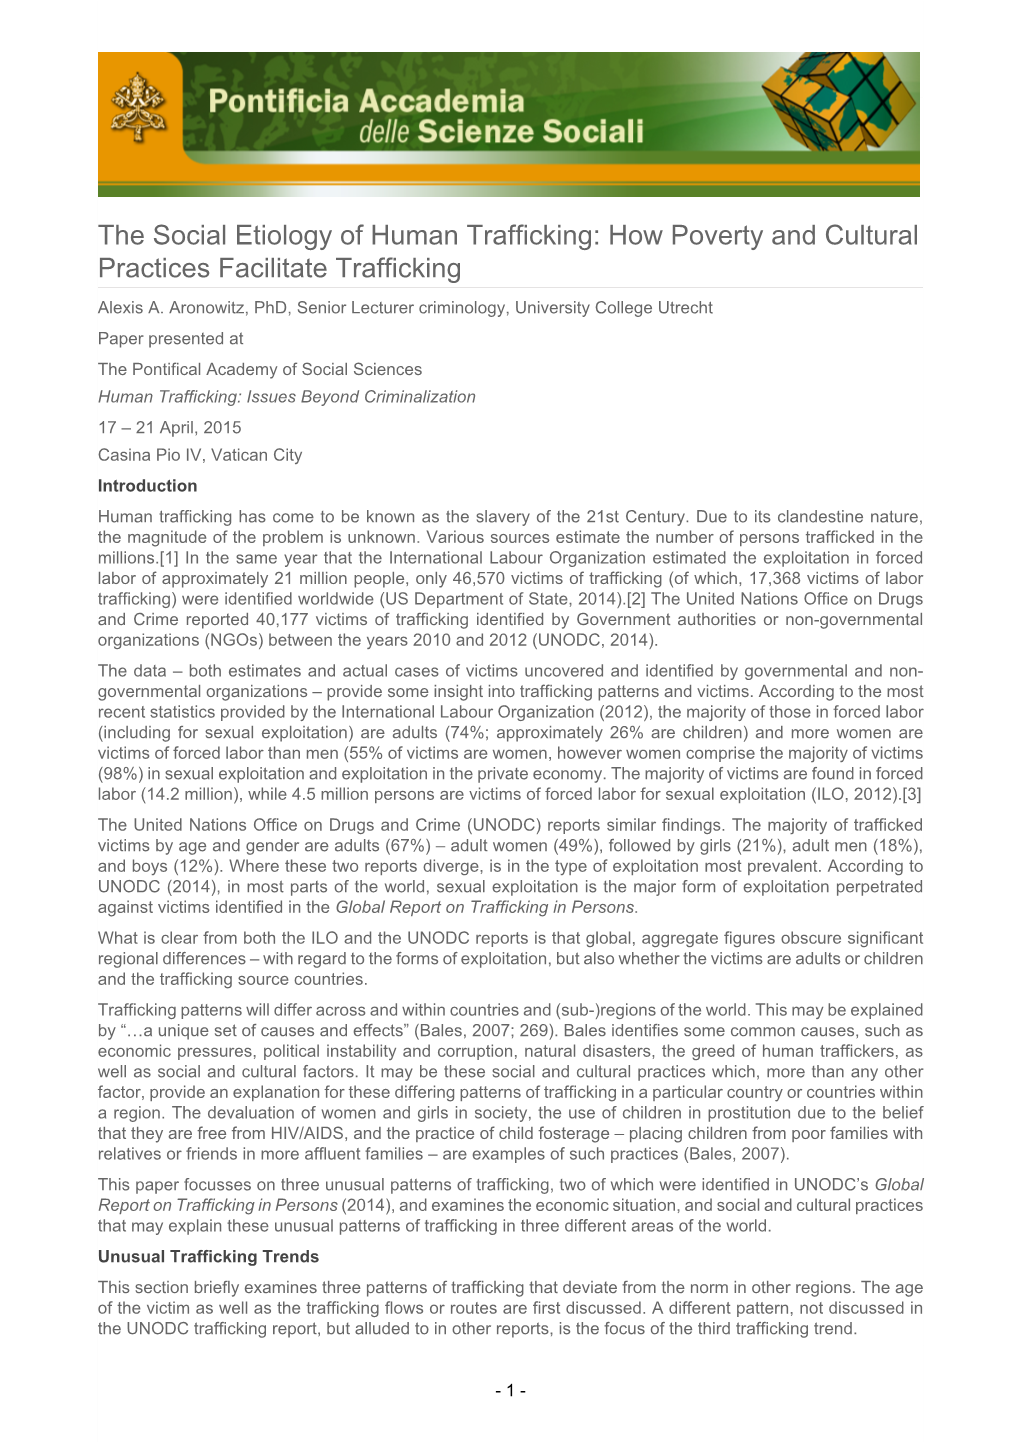 The Social Etiology of Human Trafficking: How Poverty and Cultural Practices Facilitate Trafficking Alexis A